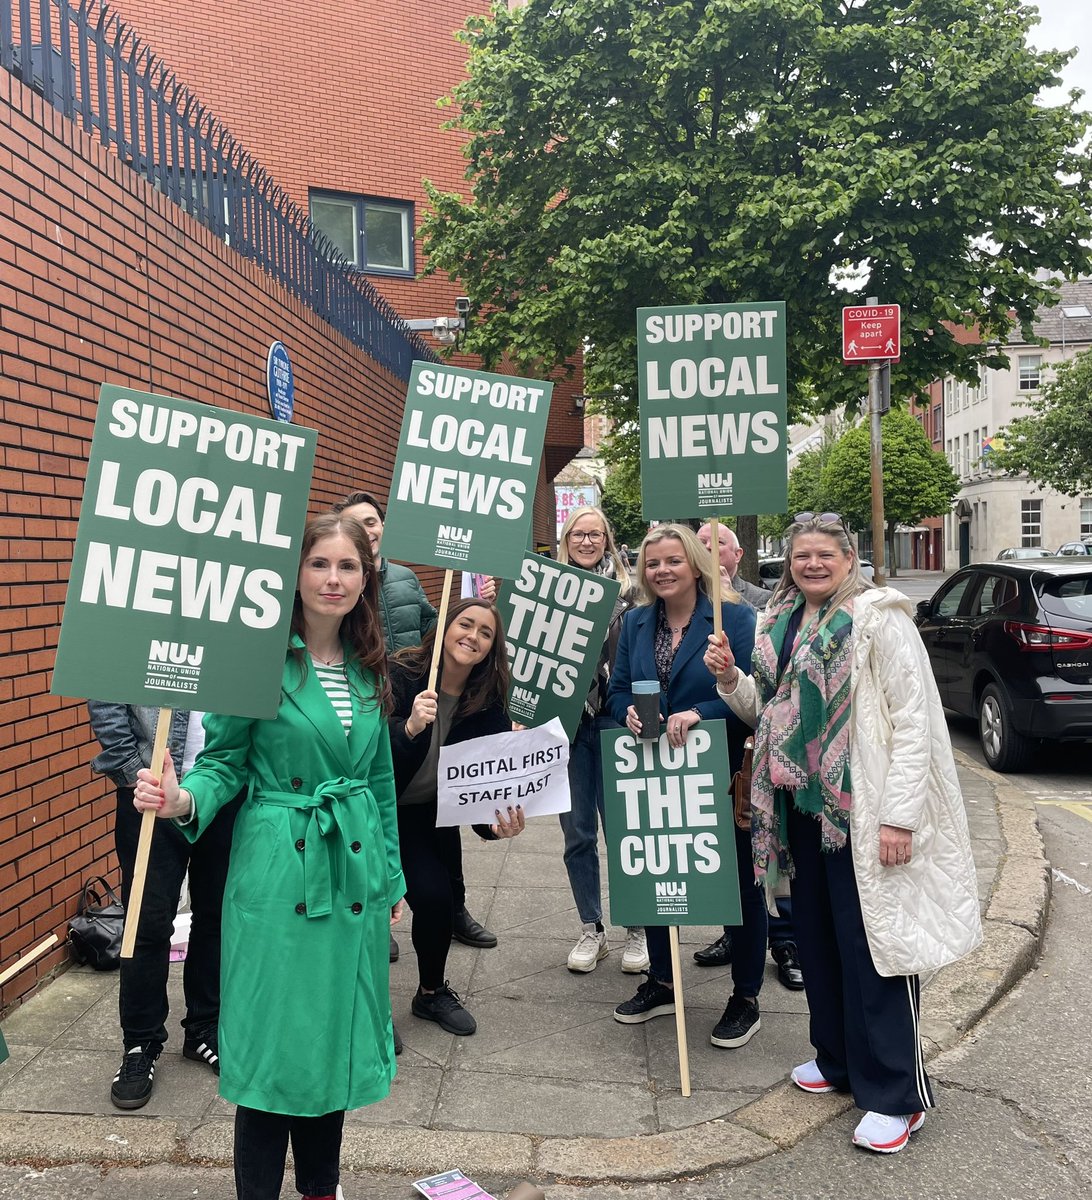 We would rather be reporting the news #Stopthecuts @NUJBBCRegions @NUJofficial